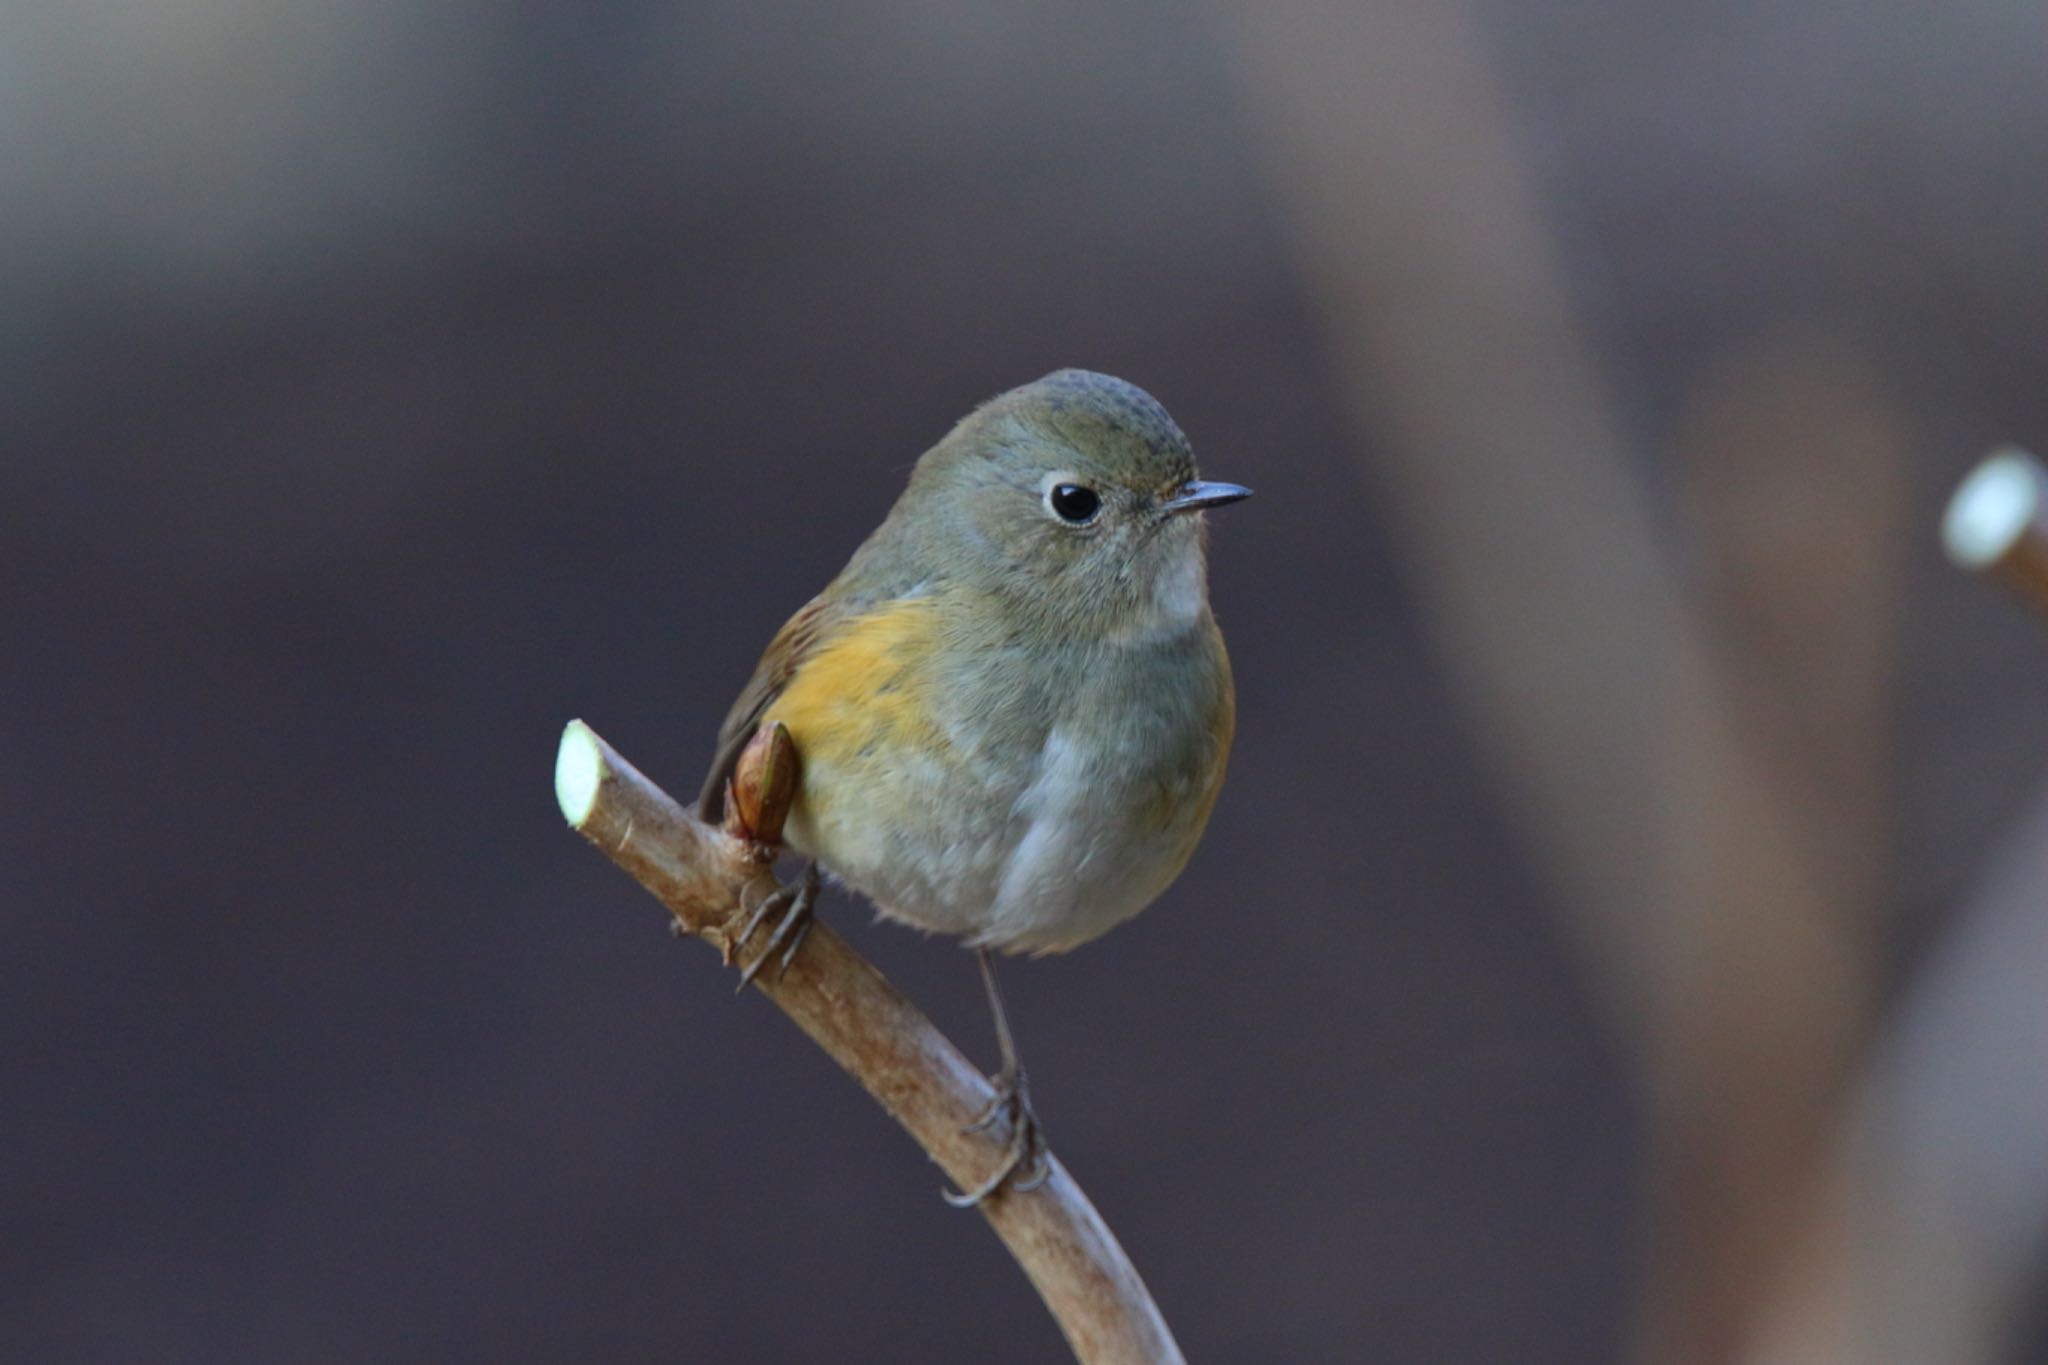 Photo of Red-flanked Bluetail at Kodomo Shizen Park by こぐまごろう